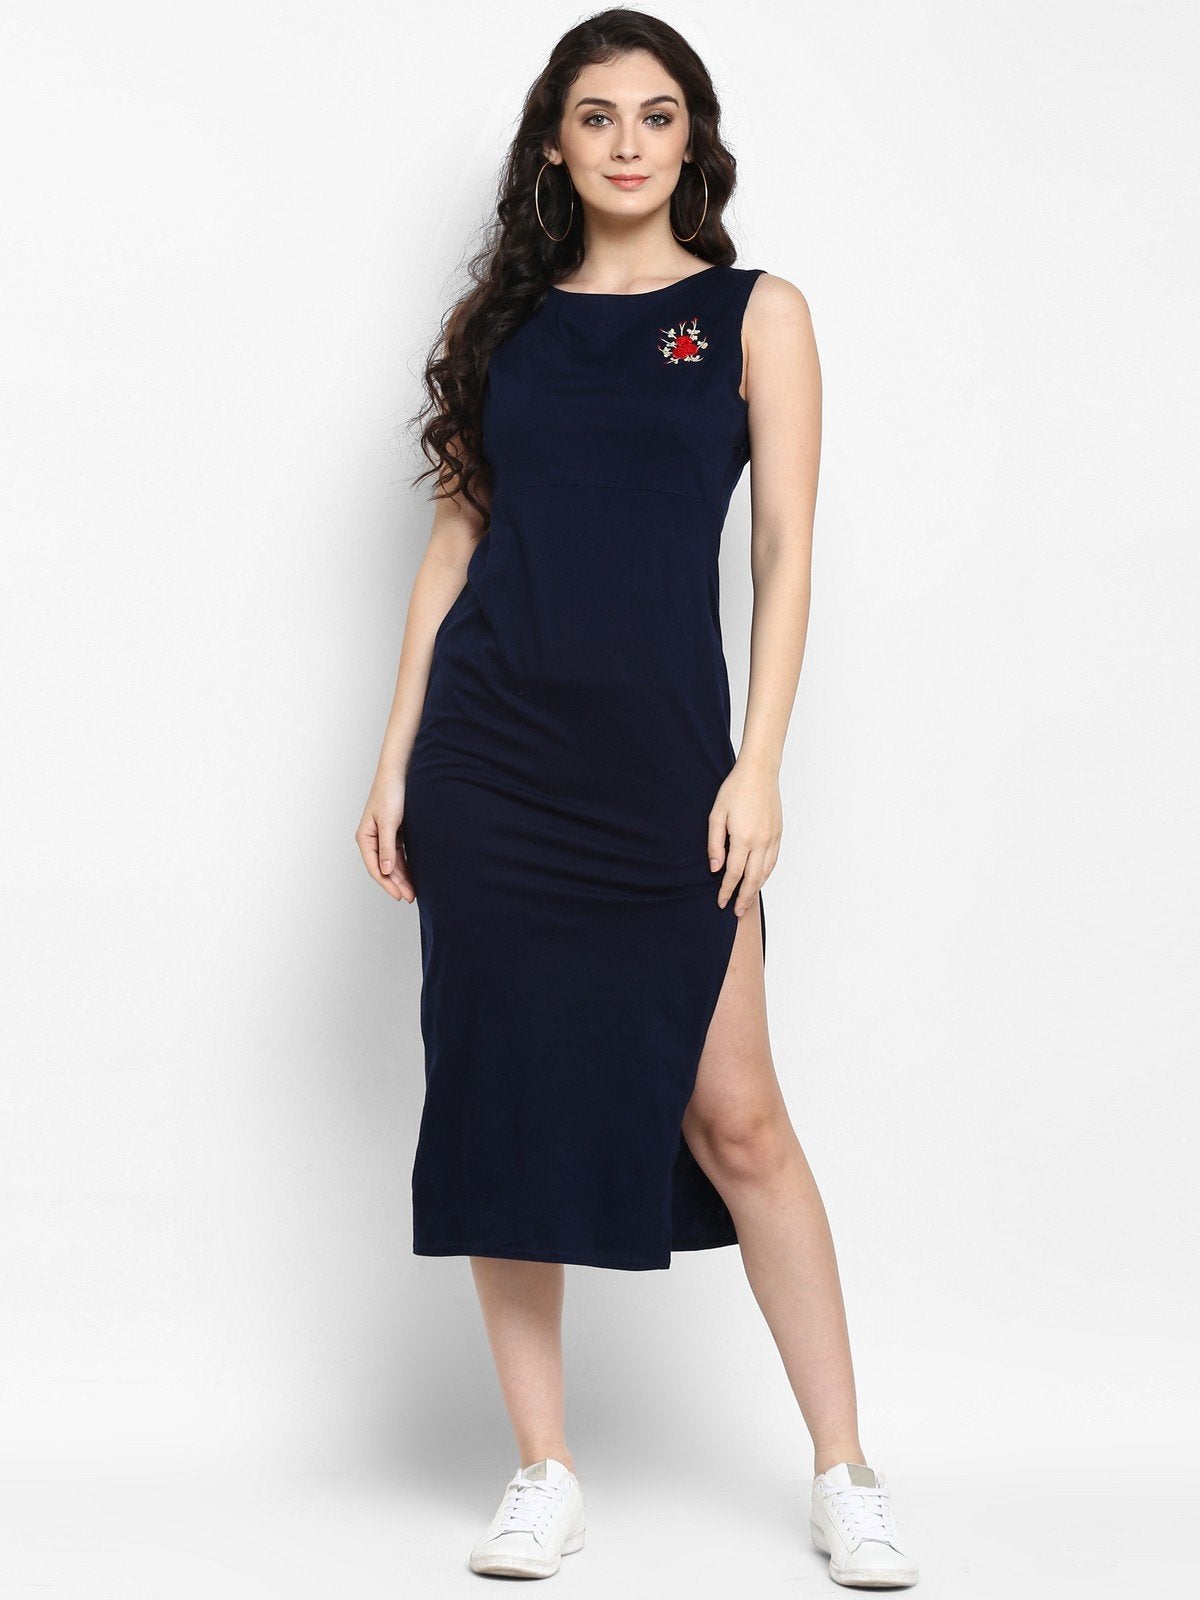 Women's Navy Embroidered Knitted Dress - Pannkh